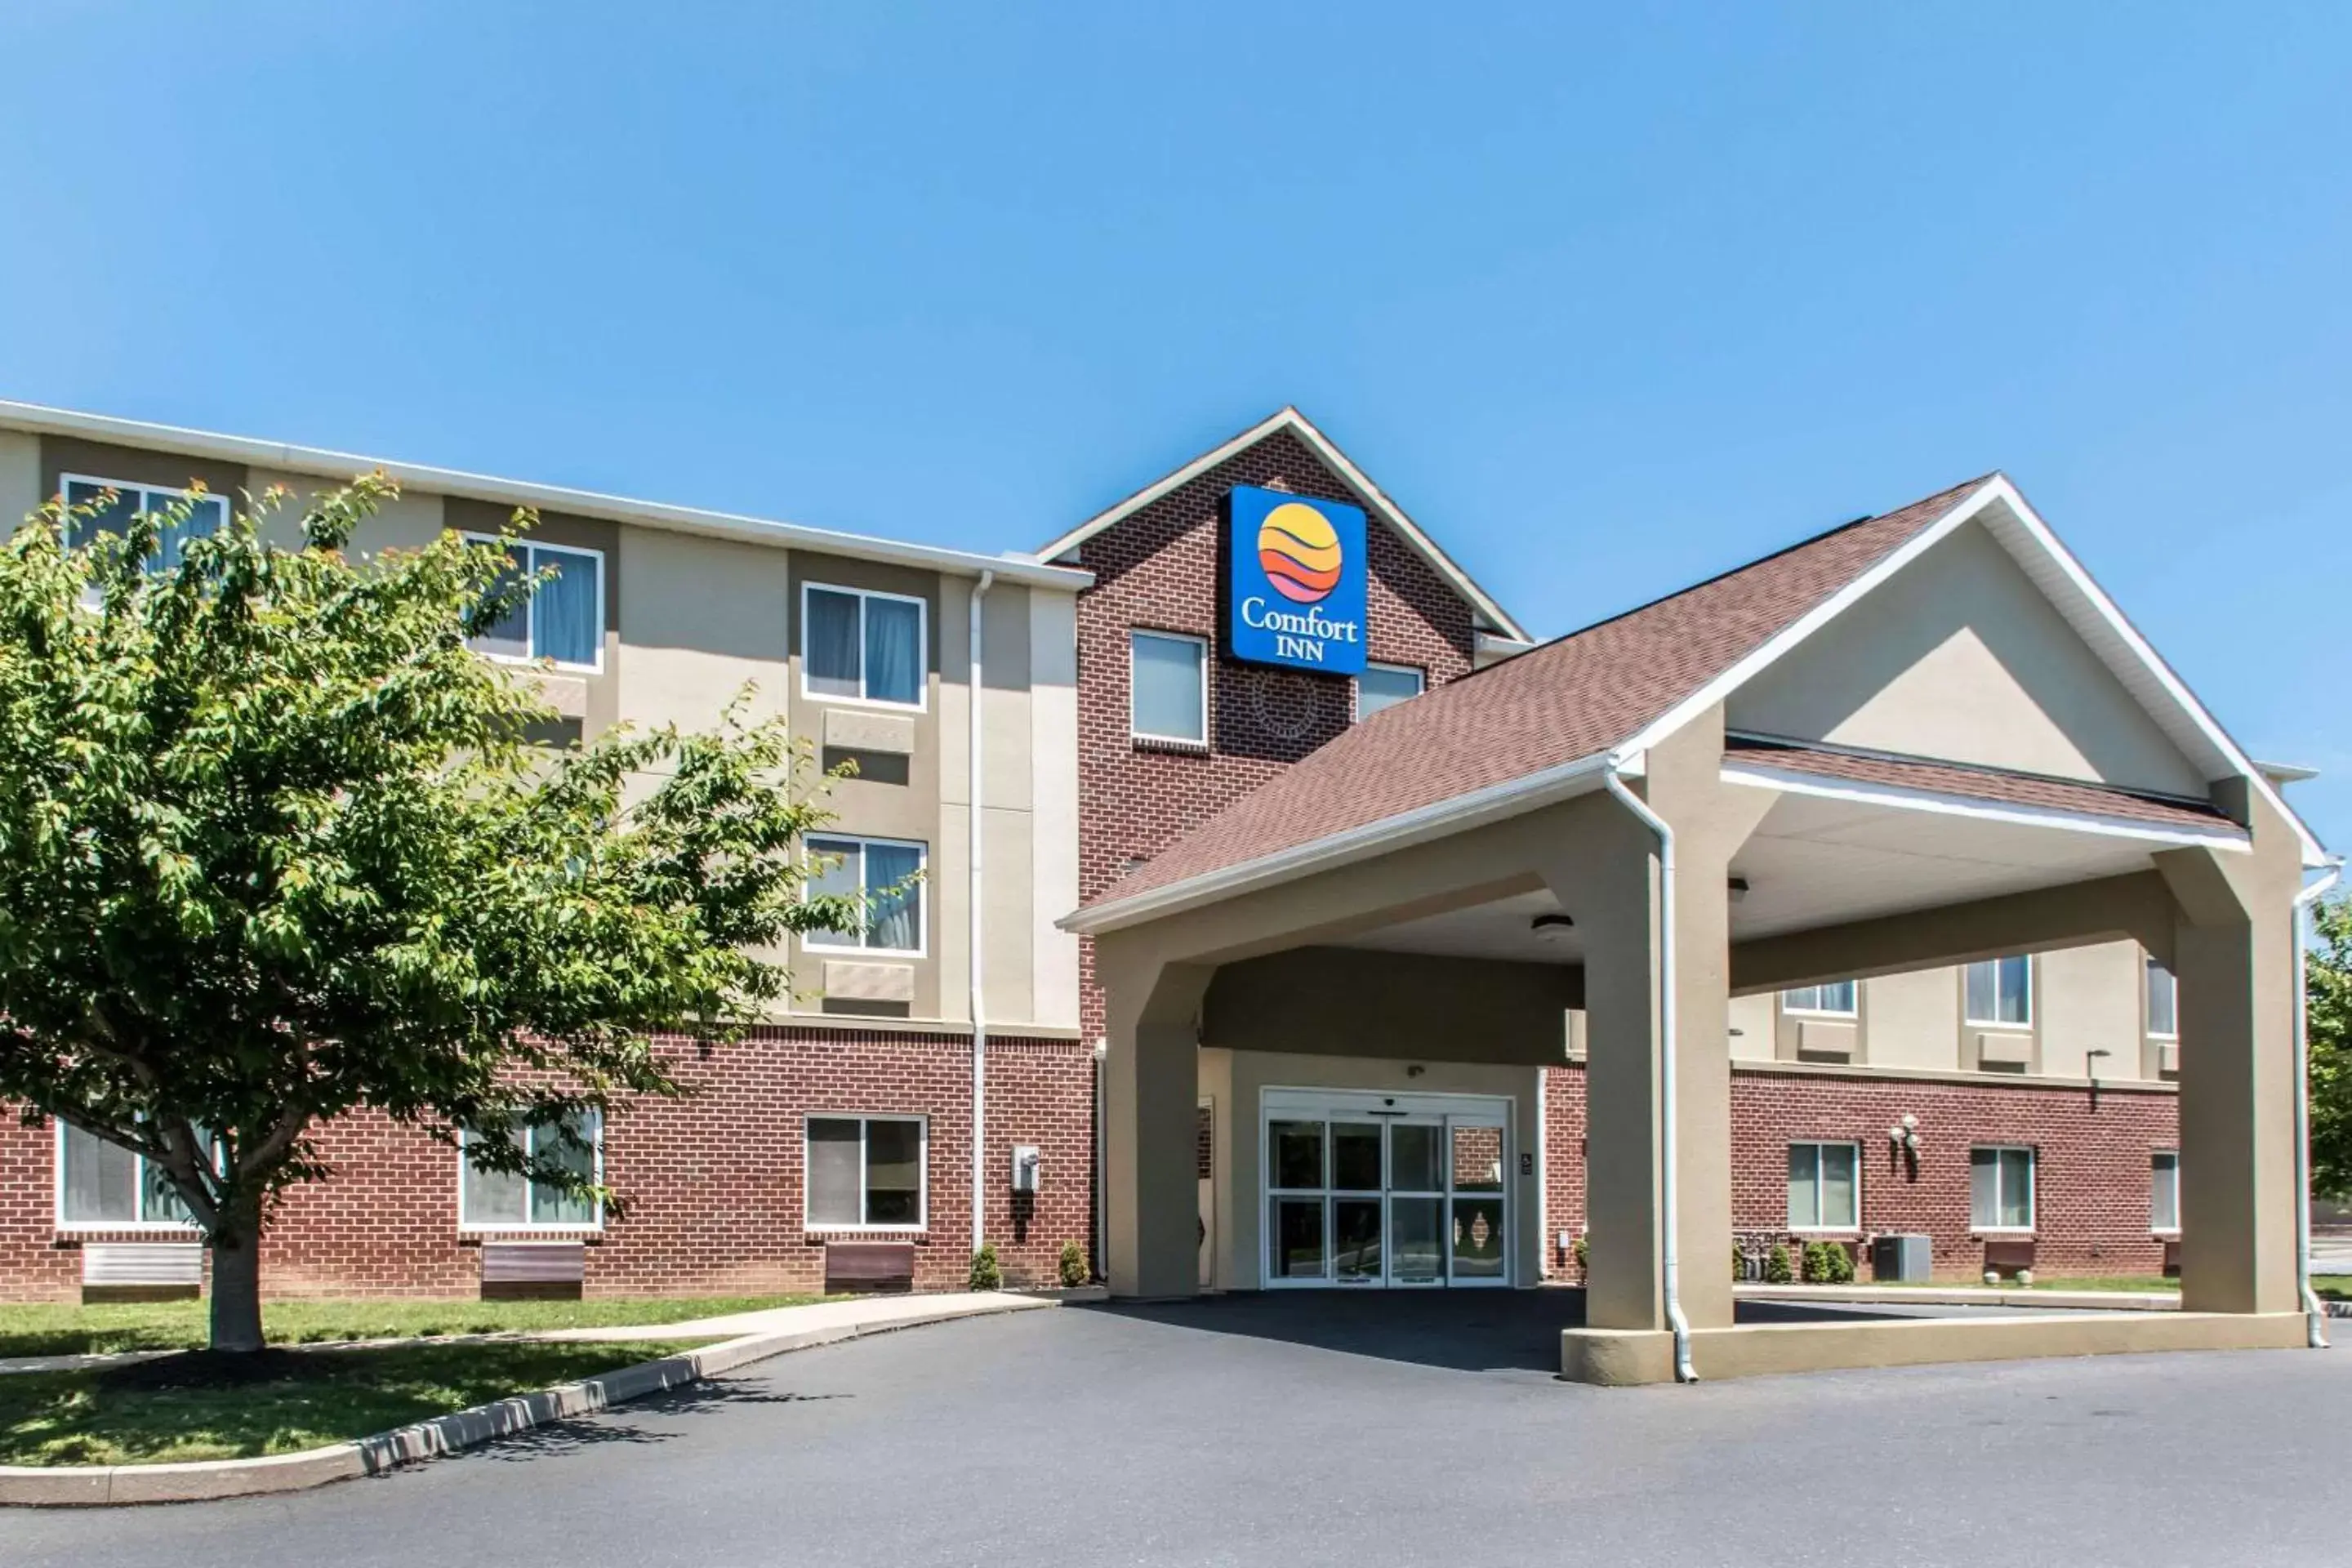 Property Building in Comfort Inn Lancaster County